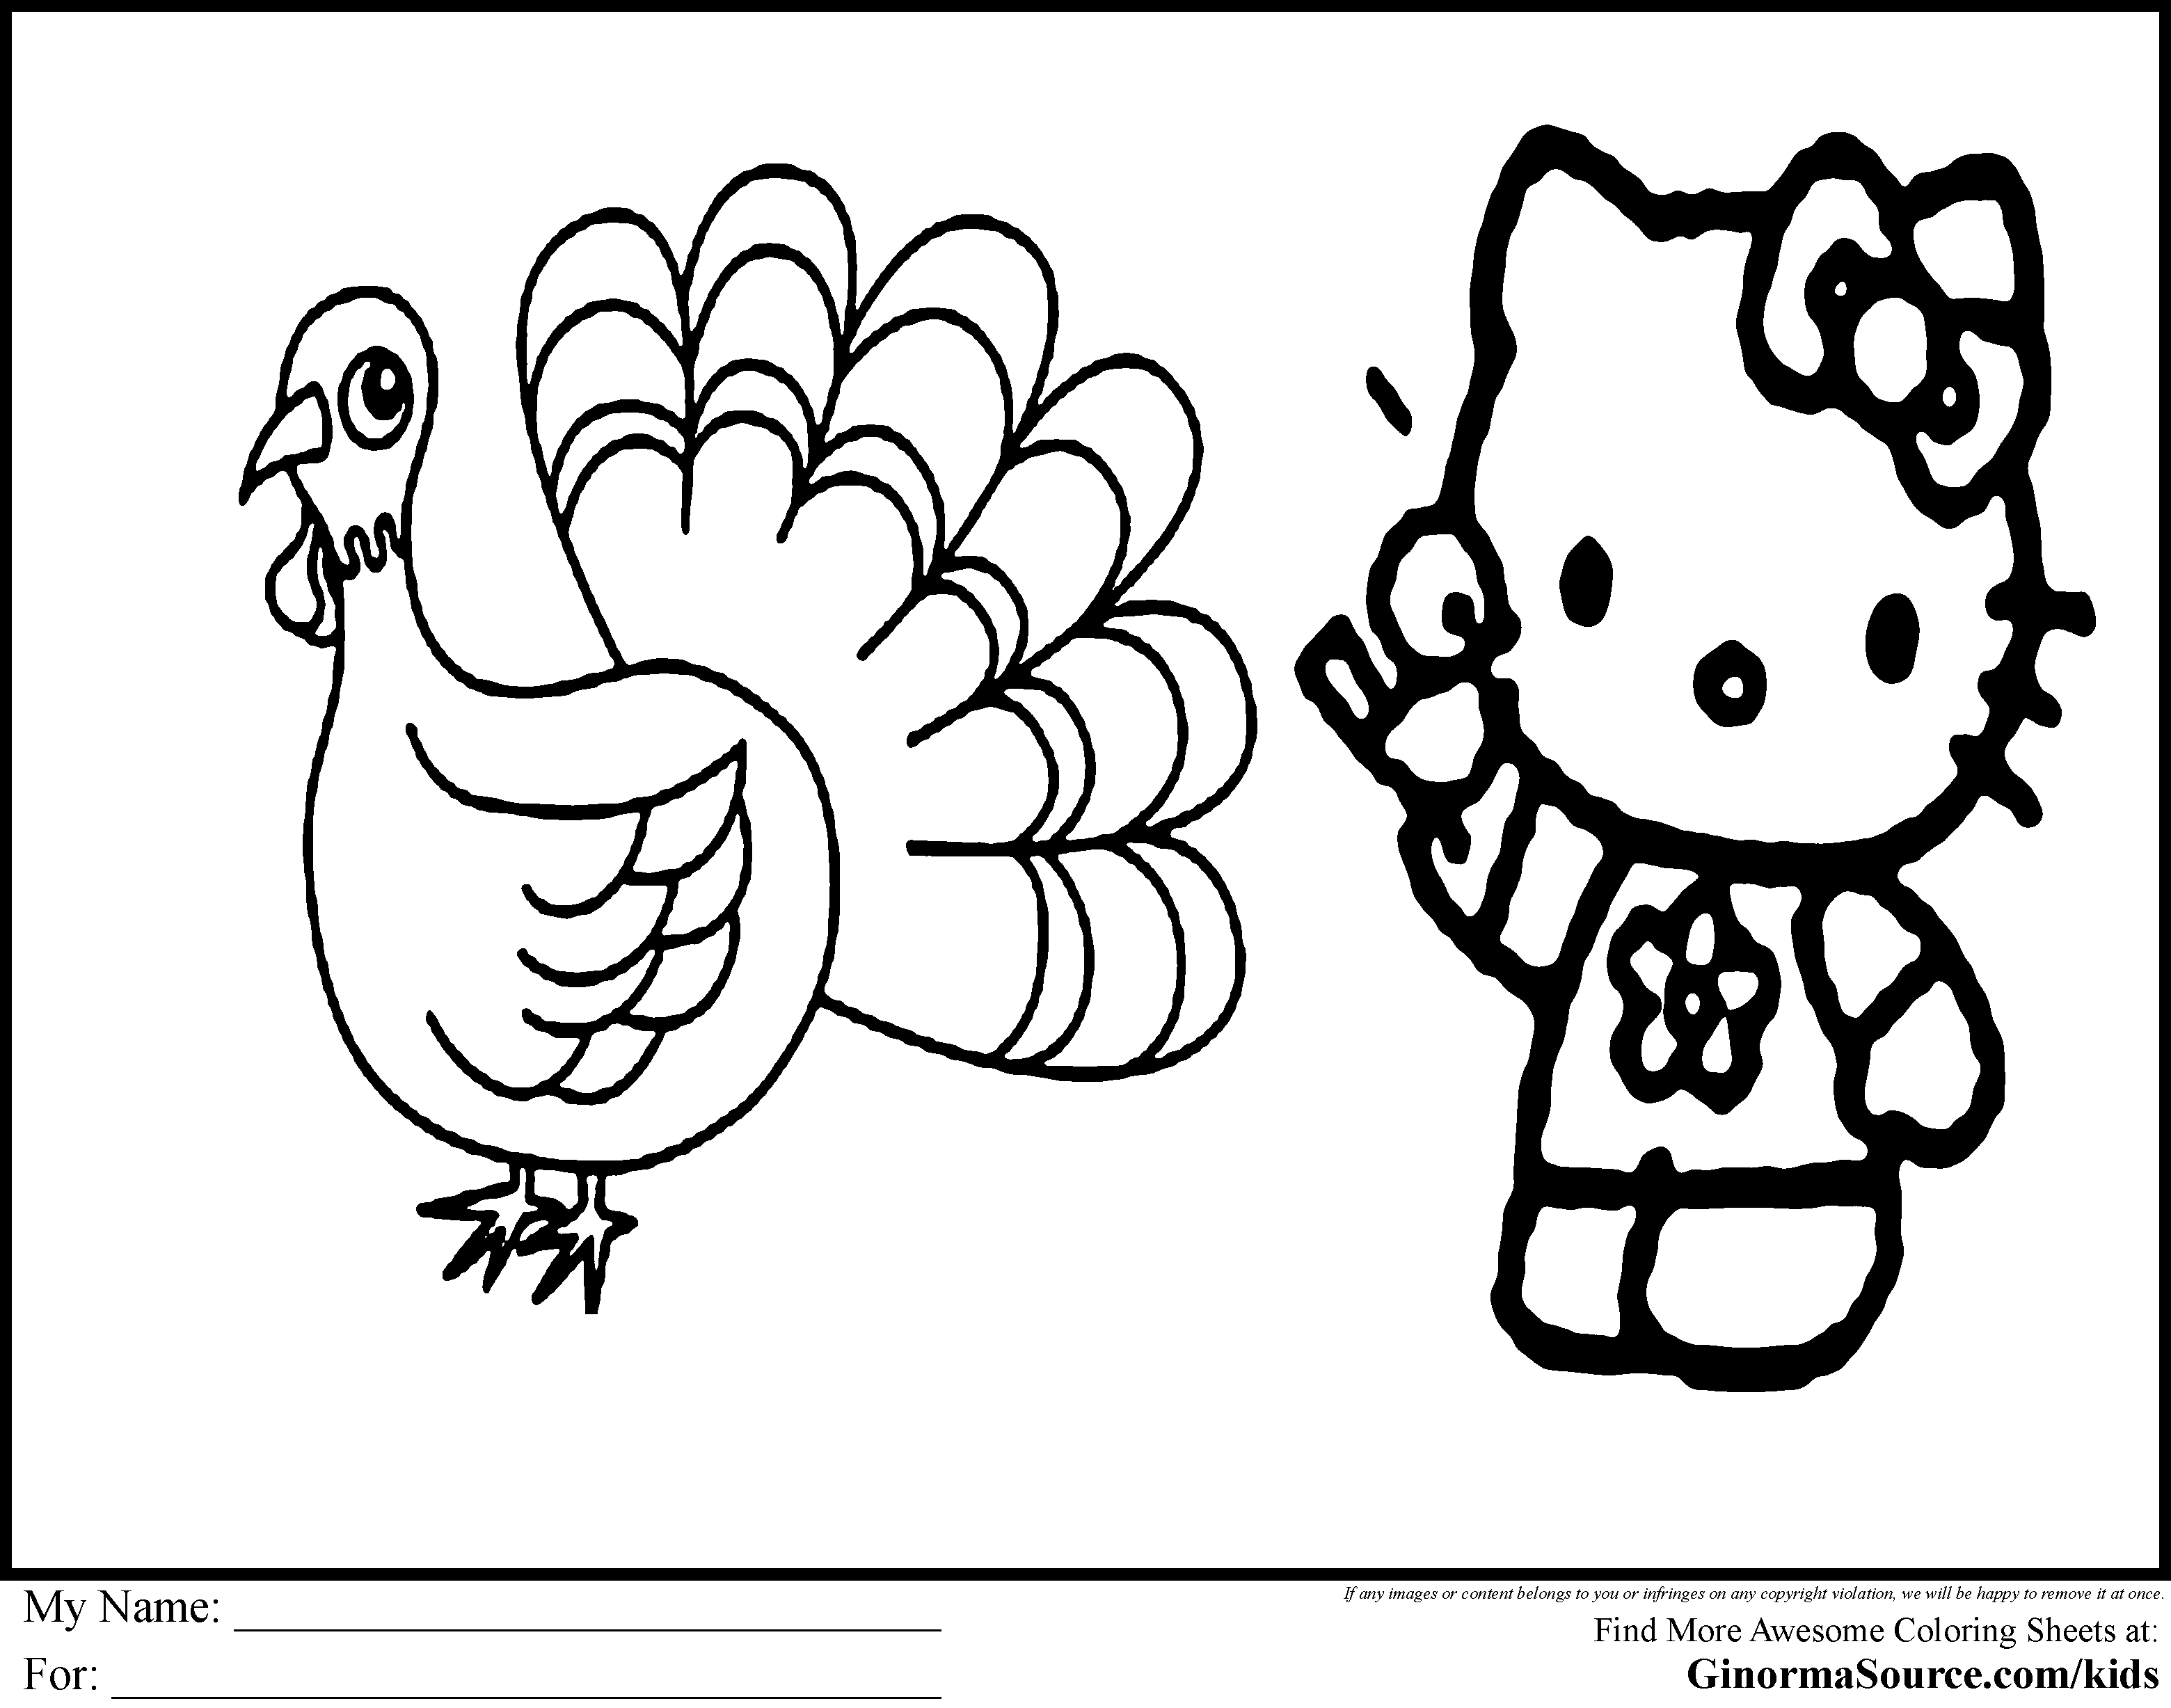 Cartoon Network Thanksgiving Coloring Pages - Coloring Pages For ...